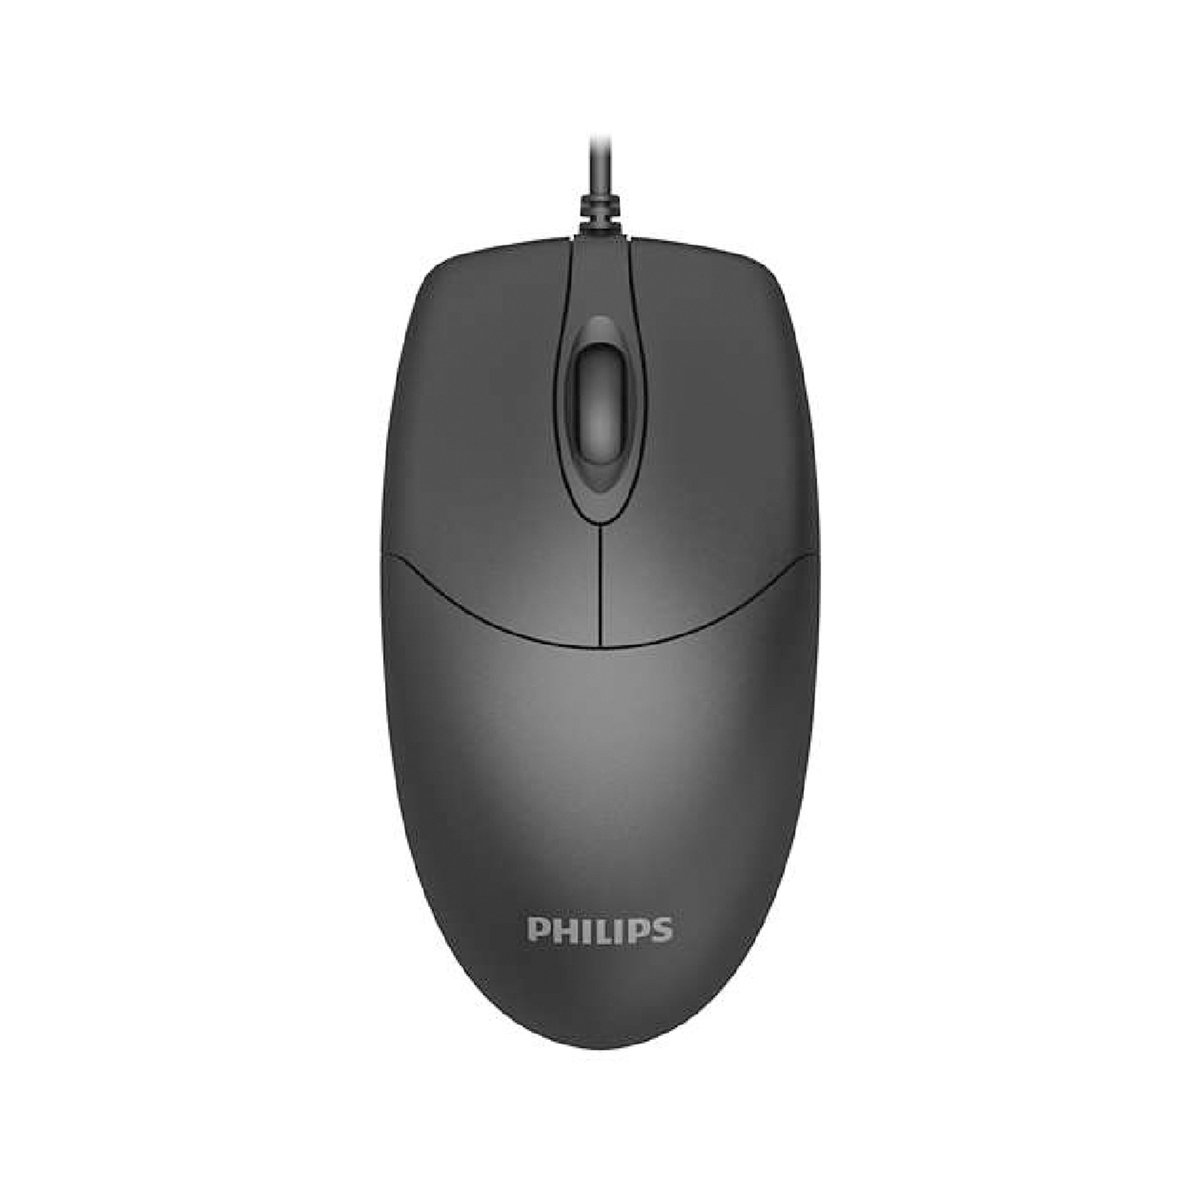 Philips USB Wired Mouse Two Handed Universal Design, Black